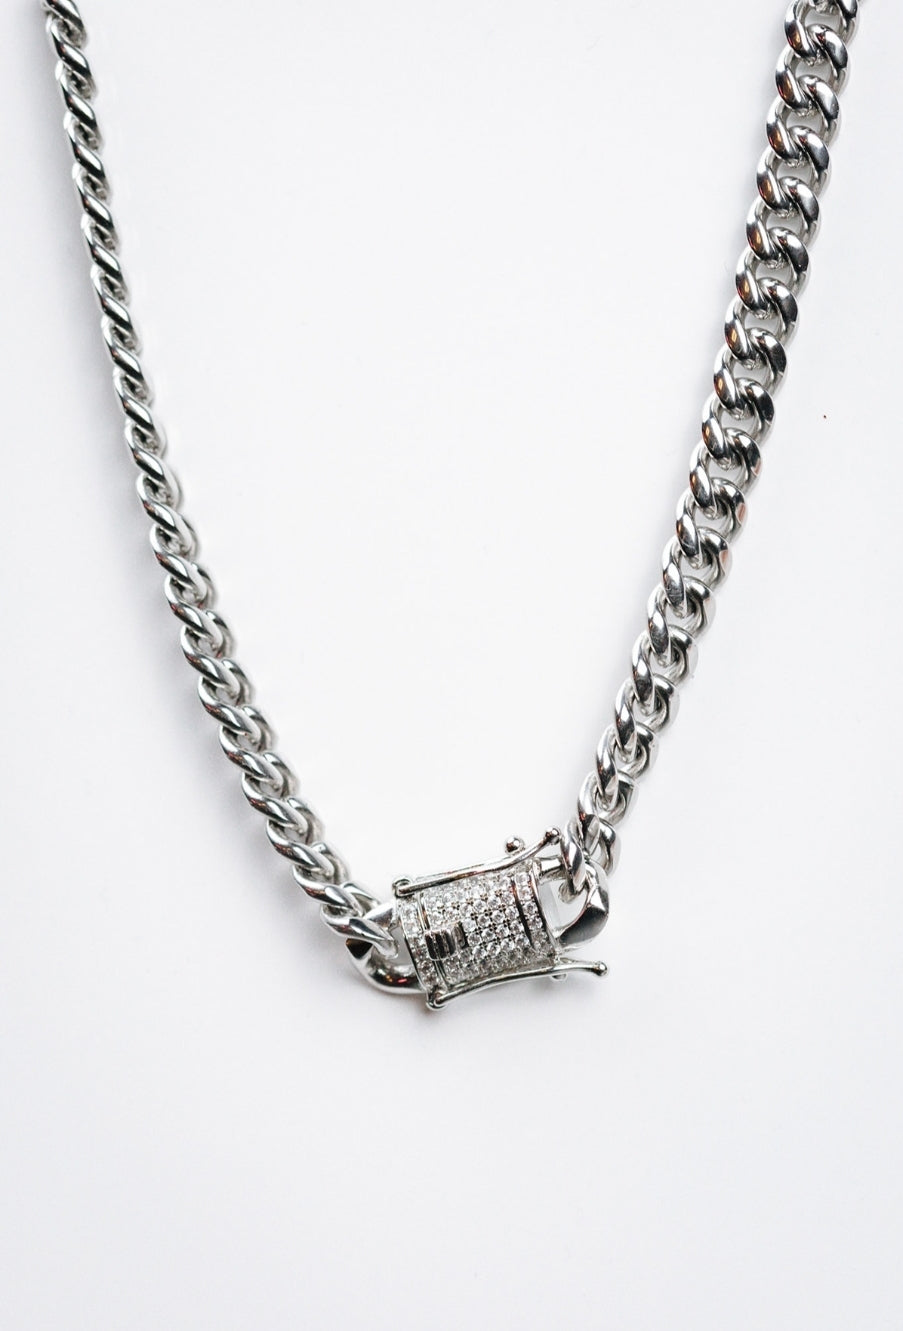 The One 316L Stainless Steel Cuban Link Chain